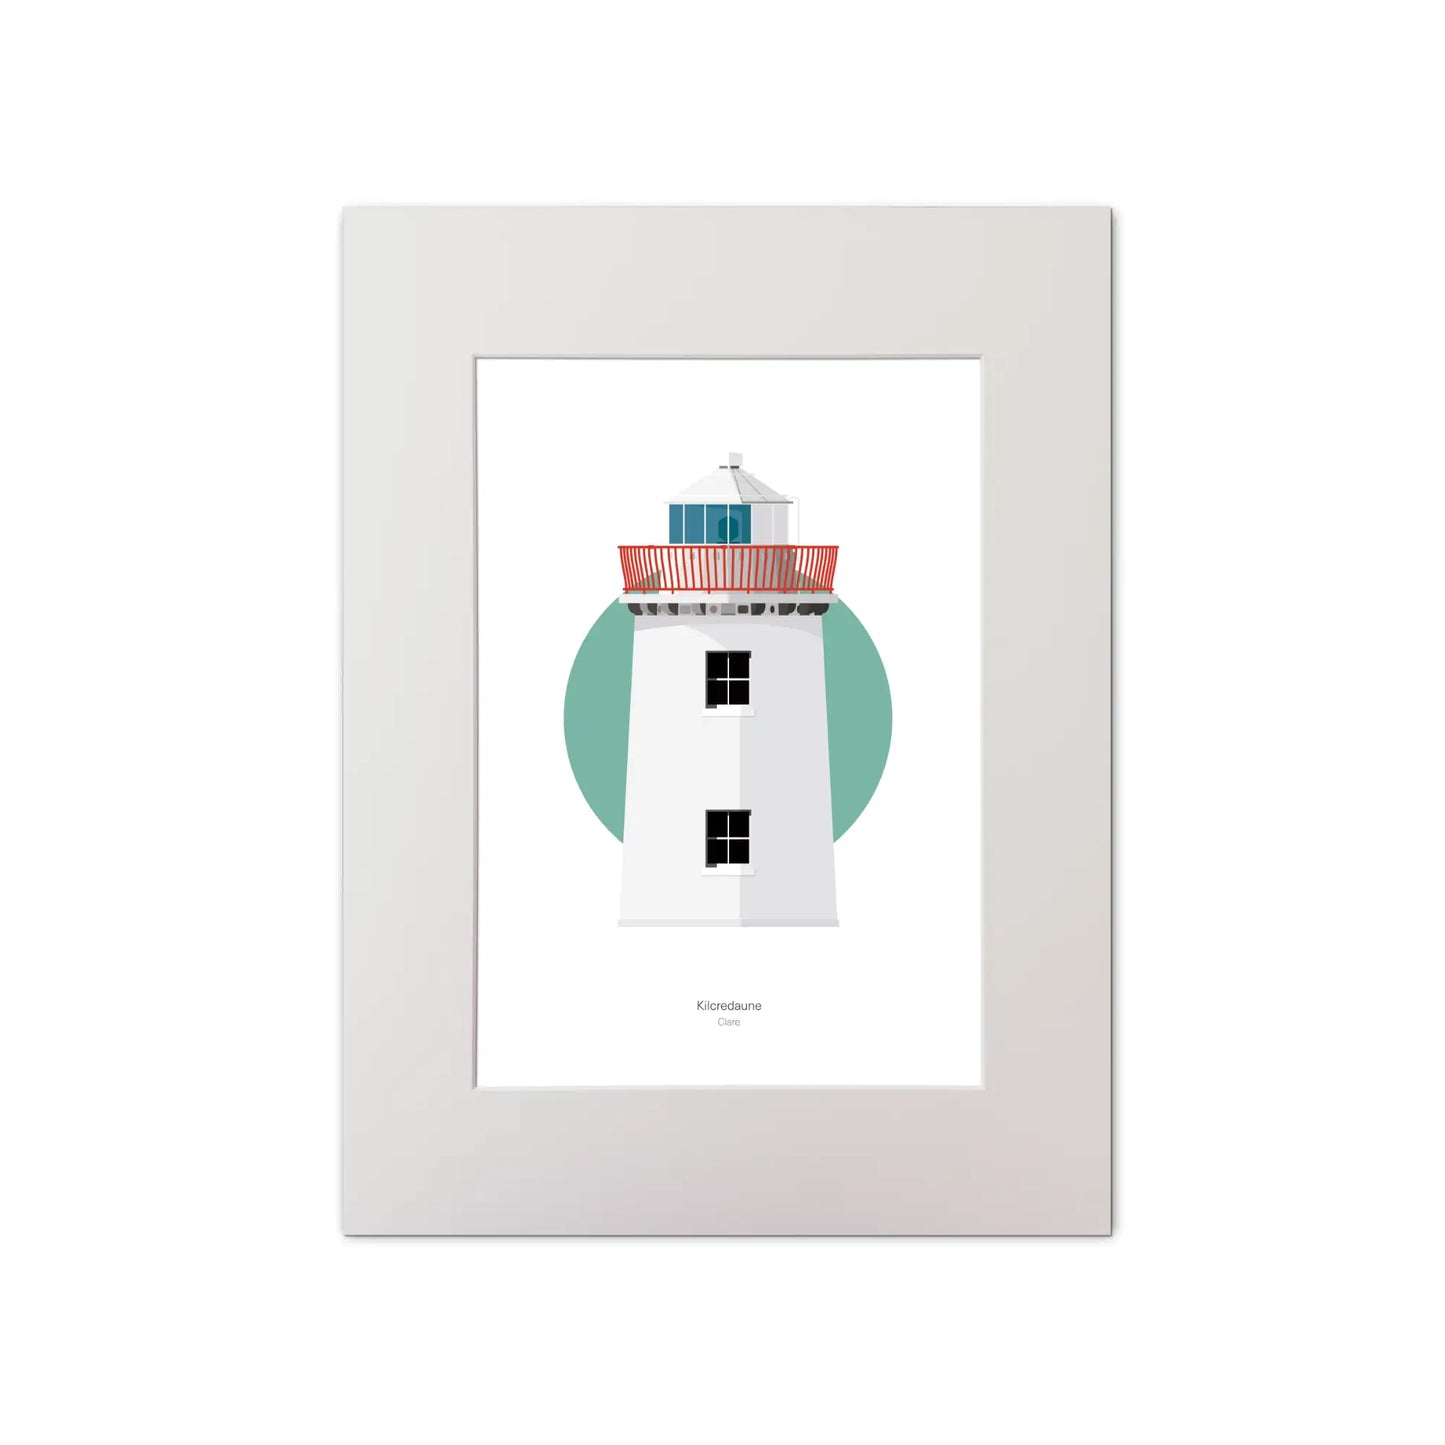 Illustration of Kilcredaun lighthouse on a white background inside light blue square, mounted and measuring 30x40cm.